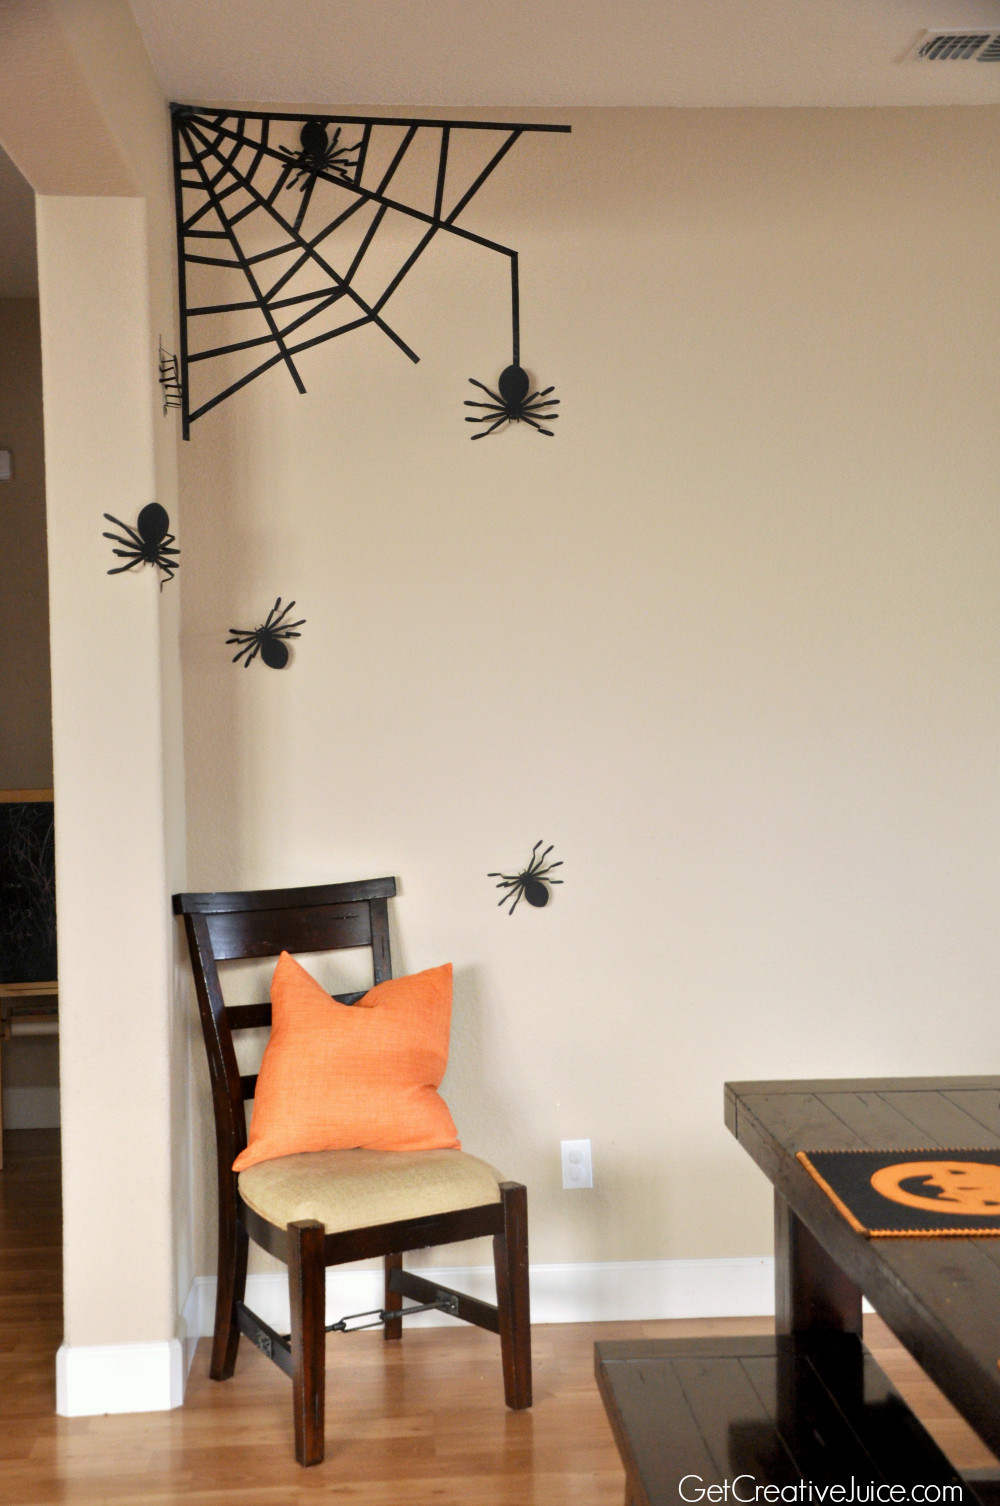 Halloween Wall Decor
 Halloween Decorations Home Tour Quick and Easy Ideas